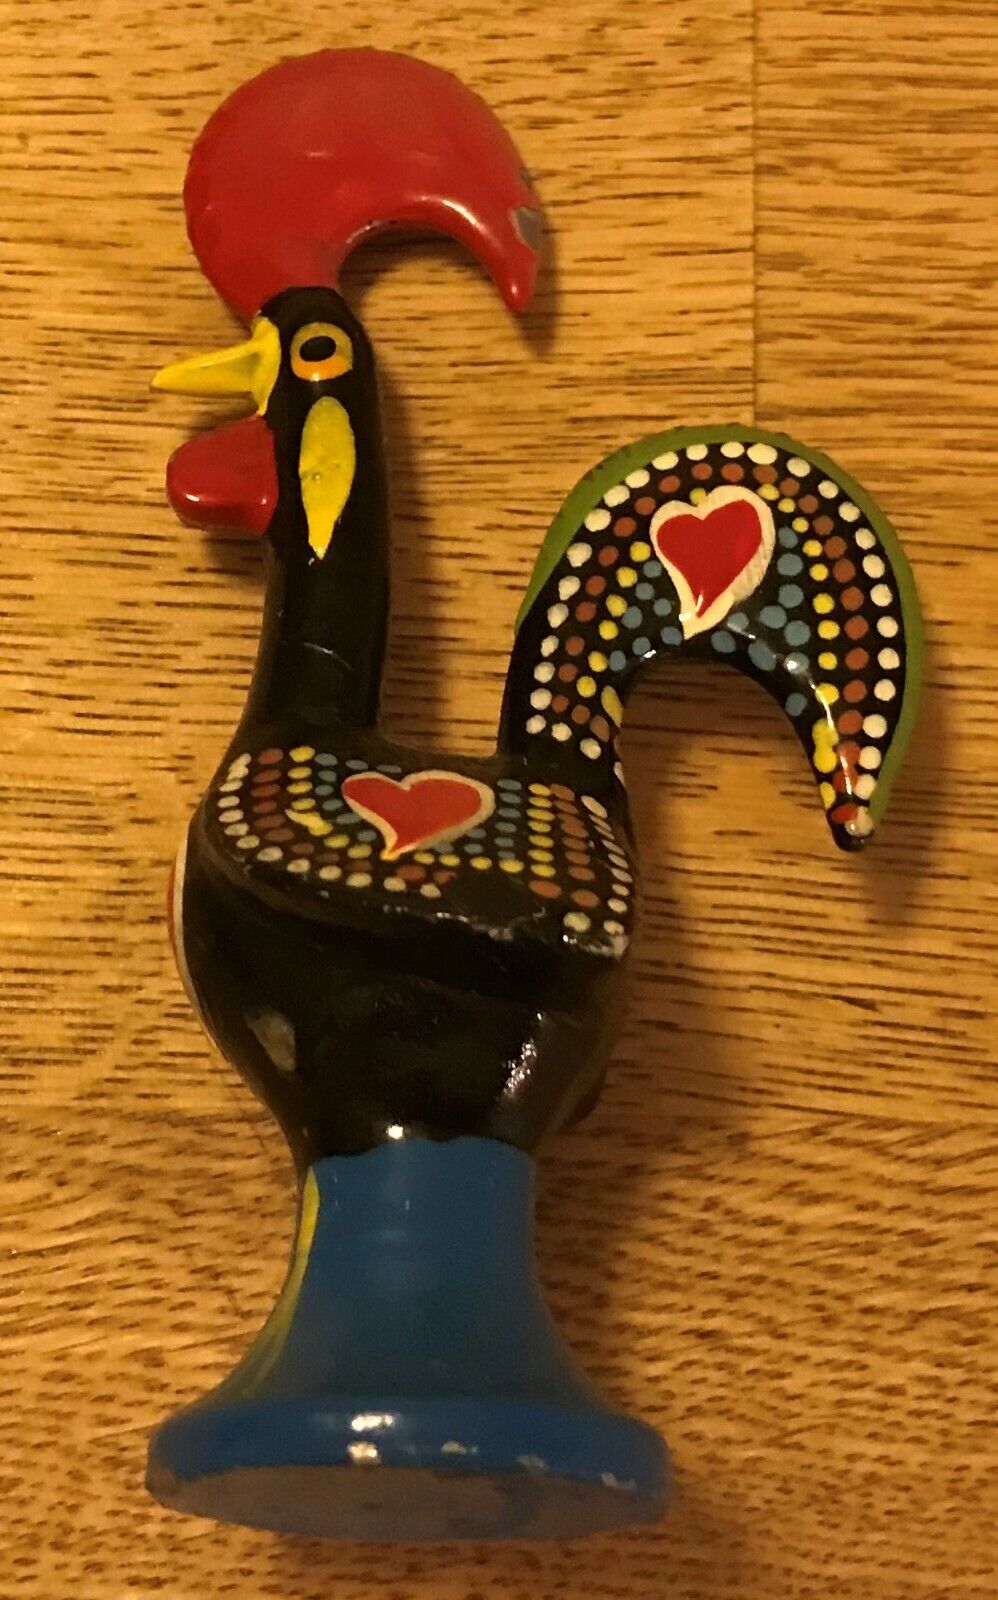 Portuguese - Hand Painted Enameled Metal - Barcelos Rooster Figurine 4 1/4